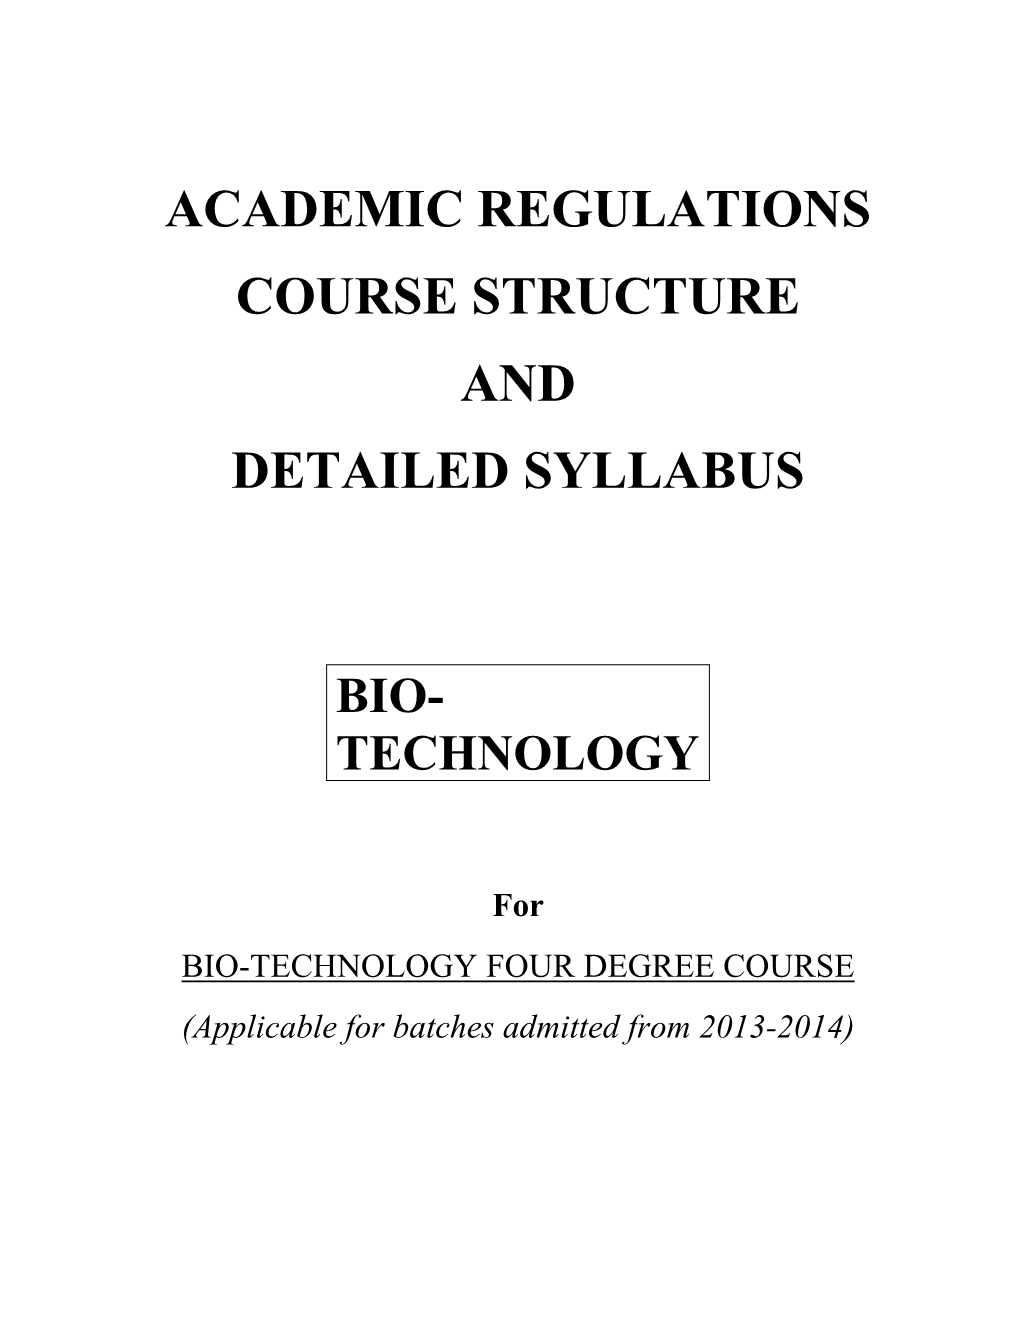 Academic Regulations Course Structure and Detailed Syllabus